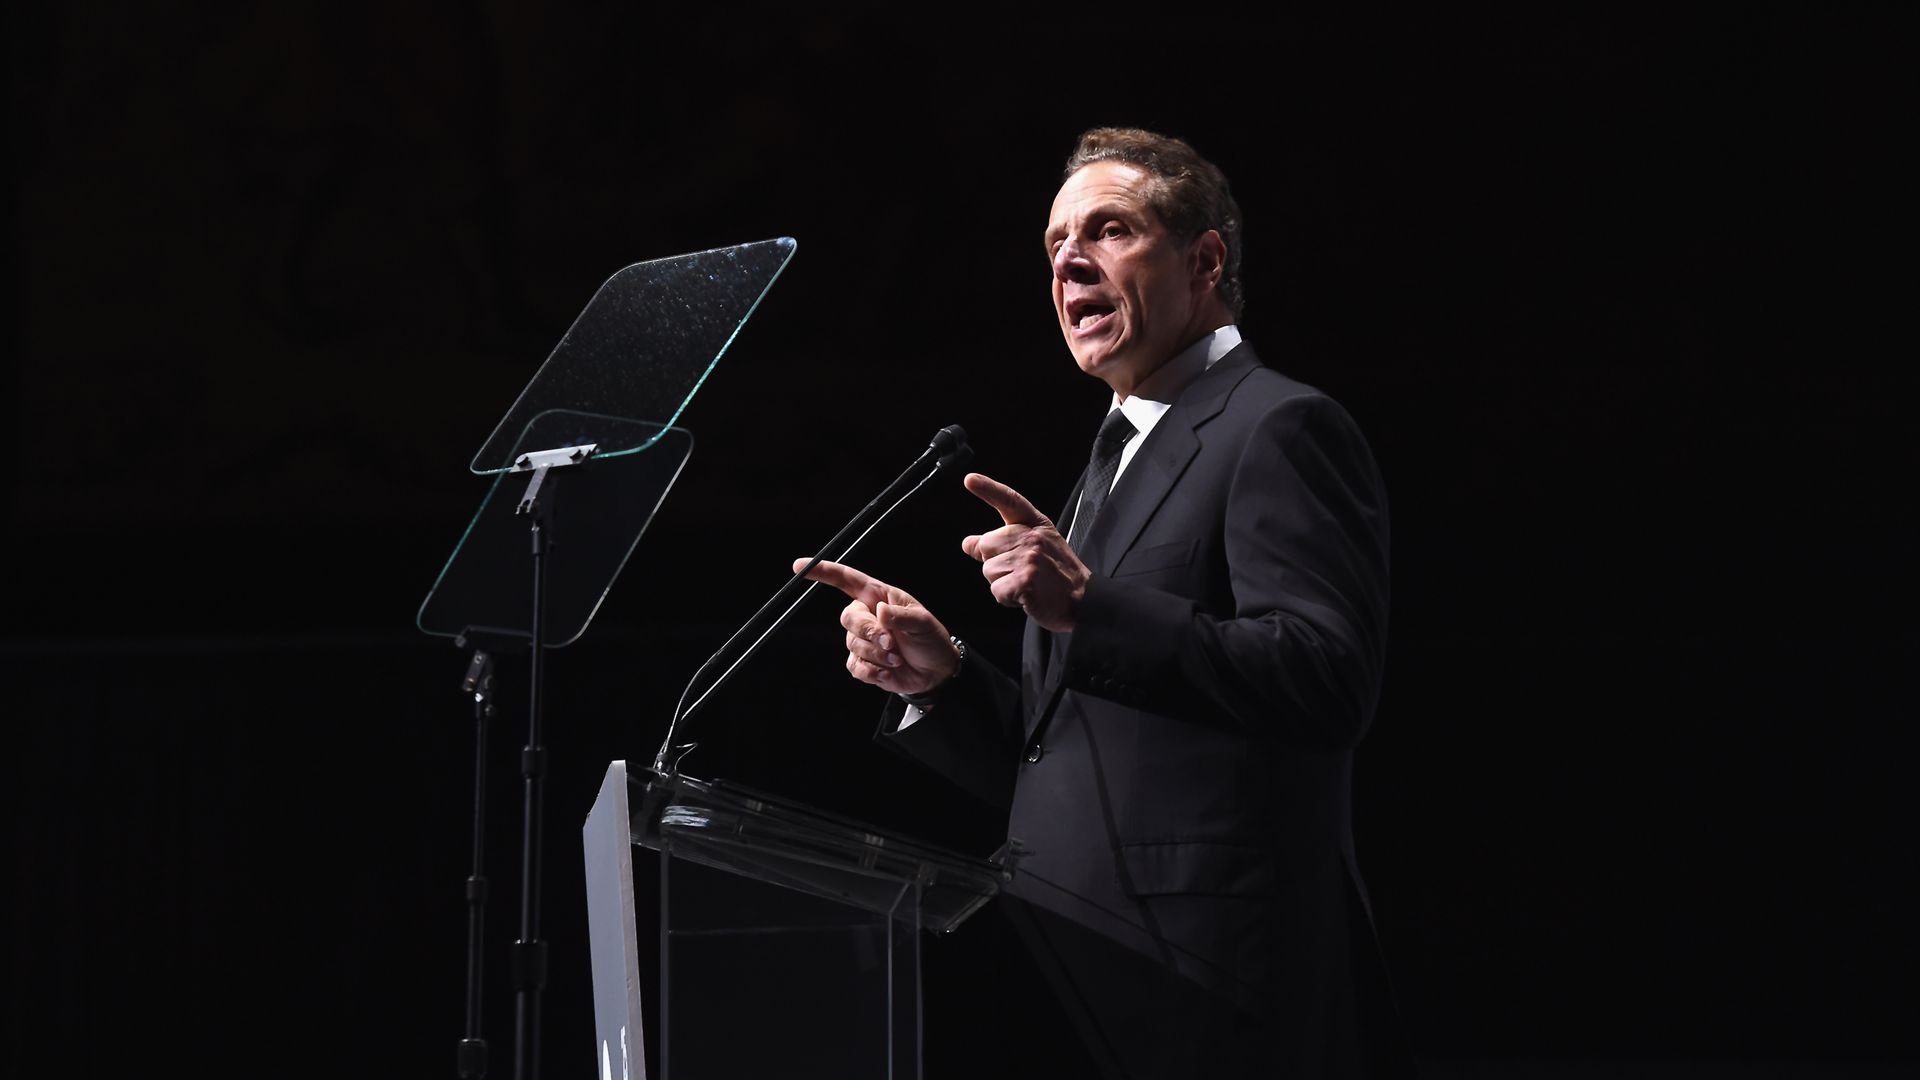 New York Gov. Andrew Cuomo speaking at a charity event.